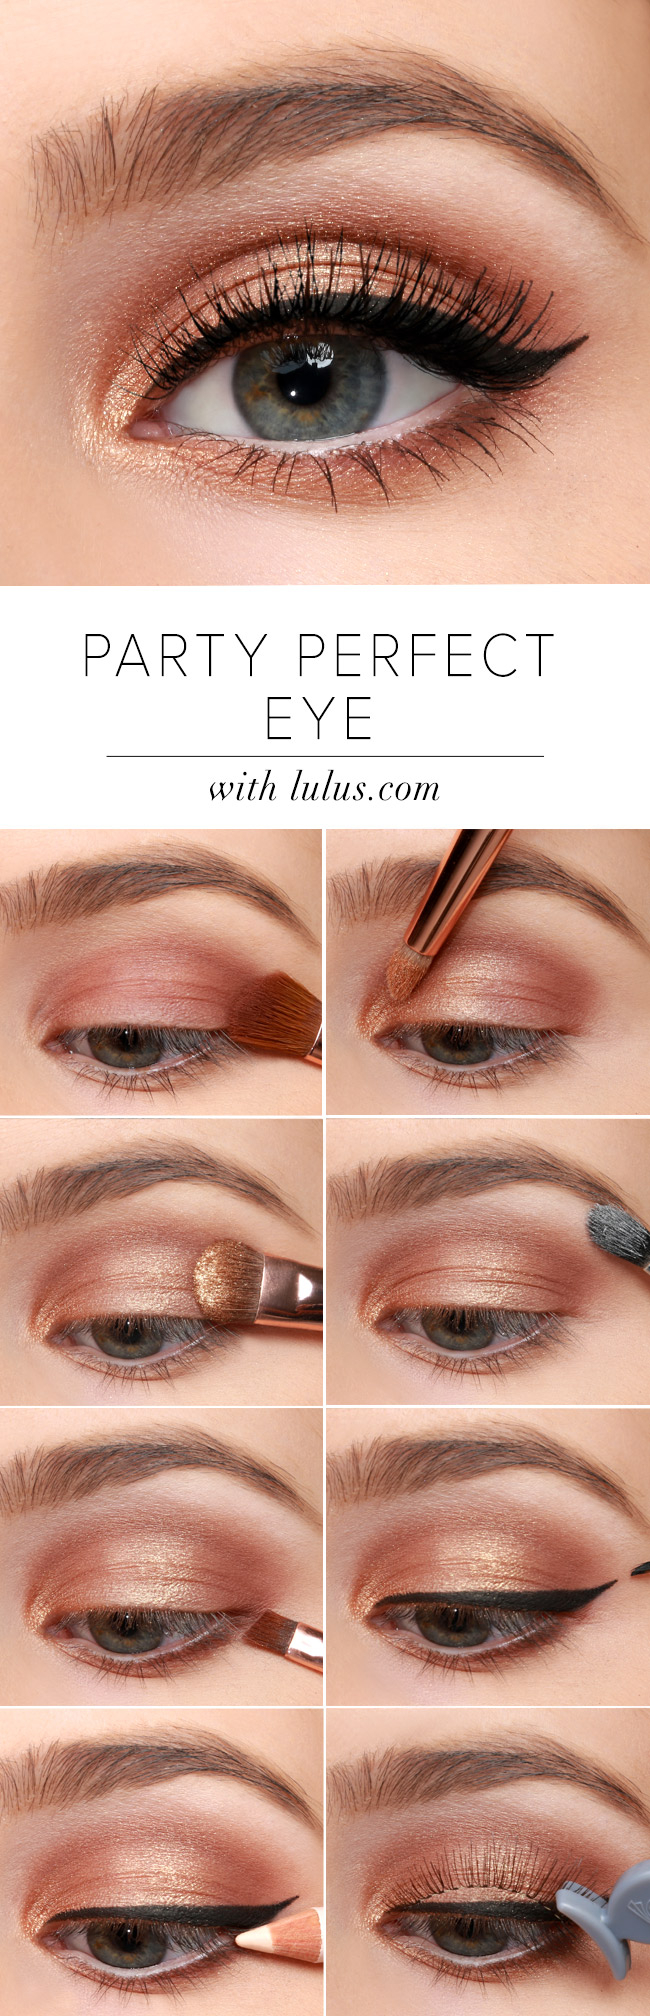 Perfect Eye Makeup Lulus How To Party Perfect Eye Makeup Tutorial Lulus Fashion Blog